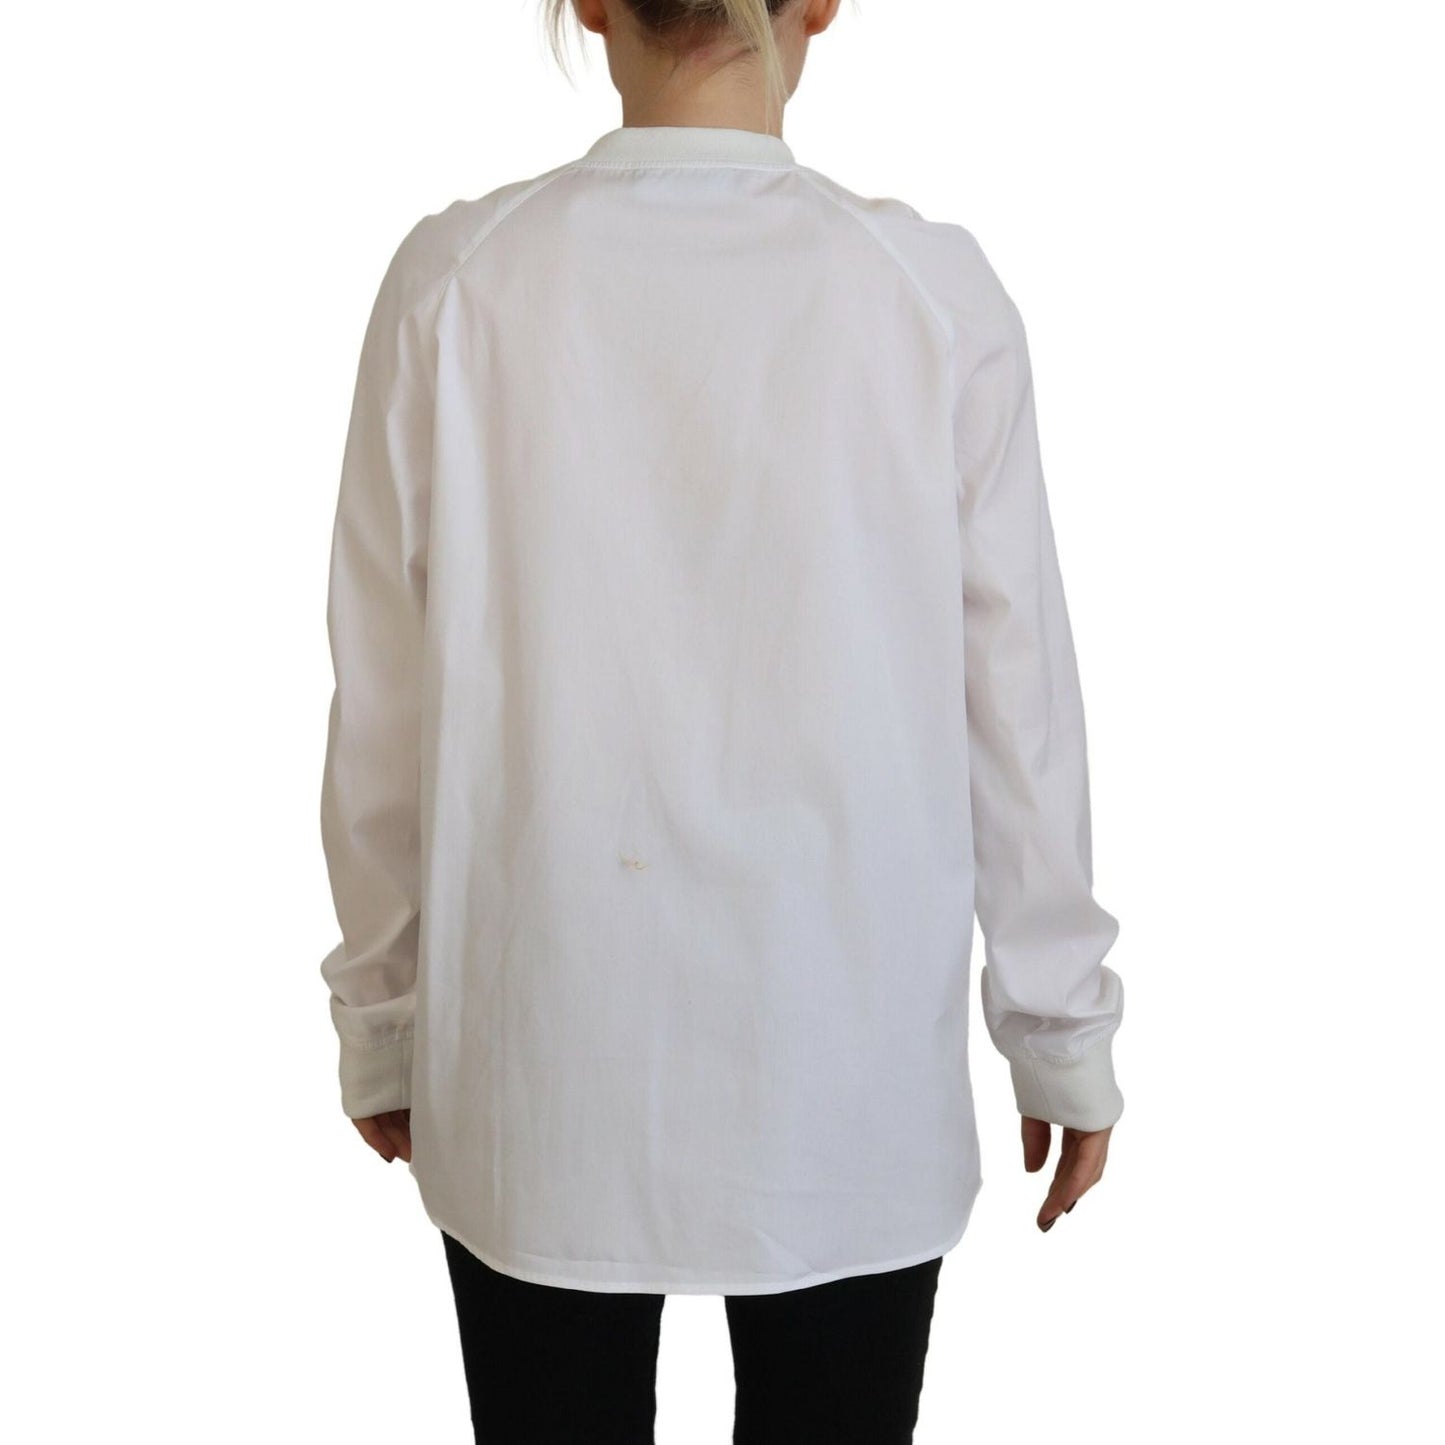 Dsquared² White Cotton Button Down Long Sleeves Crewneck Top white-cotton-button-down-long-sleeves-crewneck-top